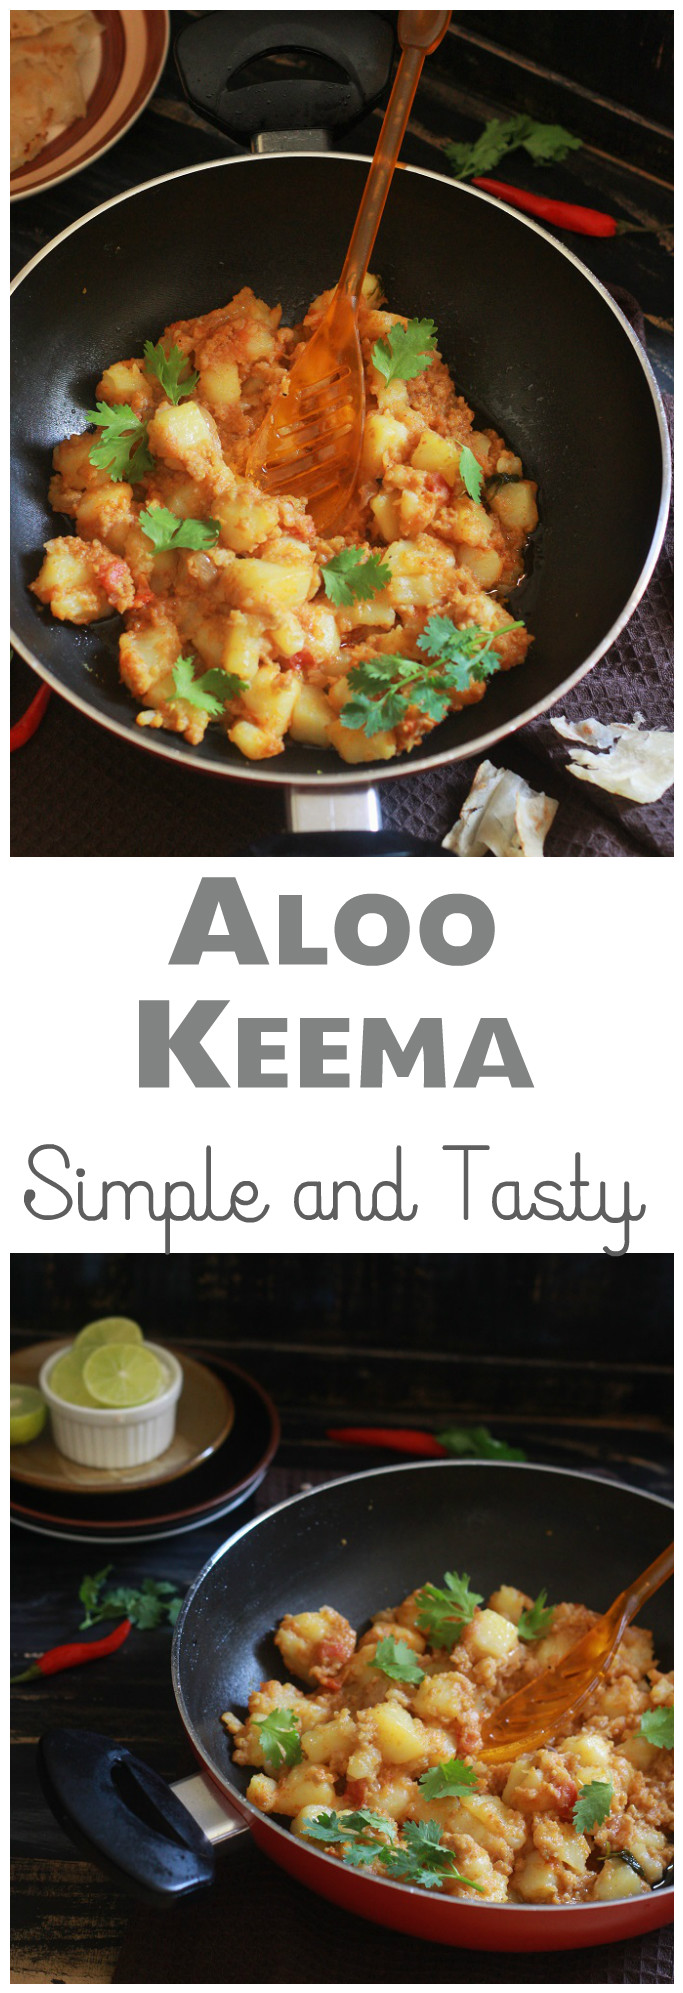 An easy and tasty aloo keema recipe. Potatoes cooked along with mutton mince with spices. It tastes great with roti, chapati, nan, plain rice or even jeera rice.